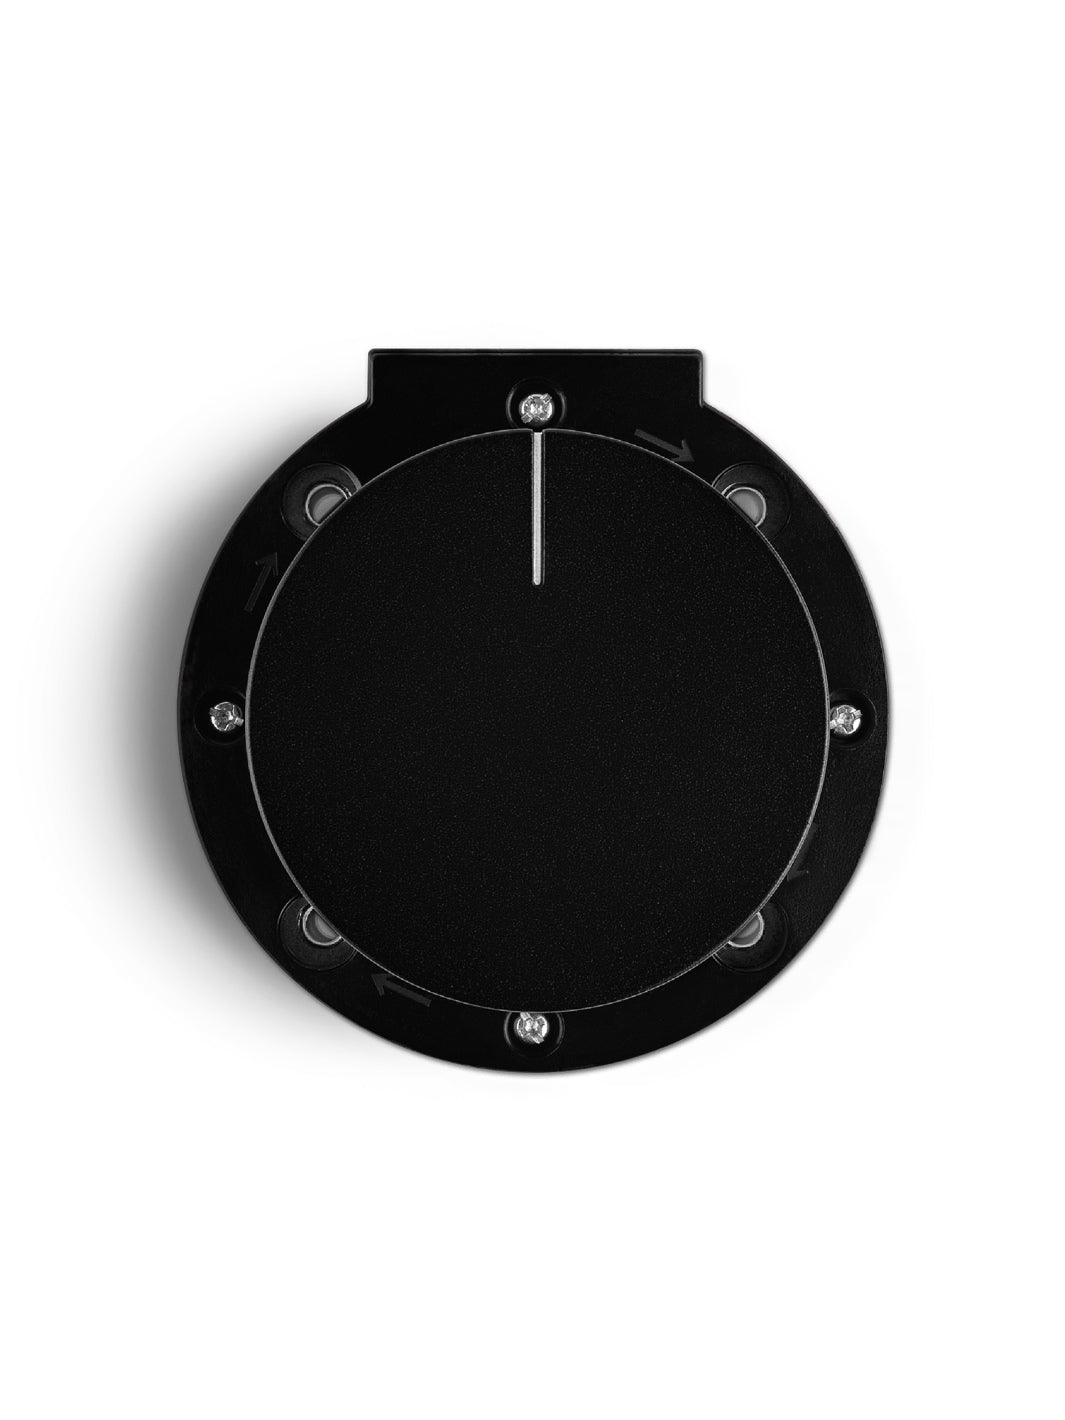 FELLOW Ode Replacement Grind Dial (Matte Black)